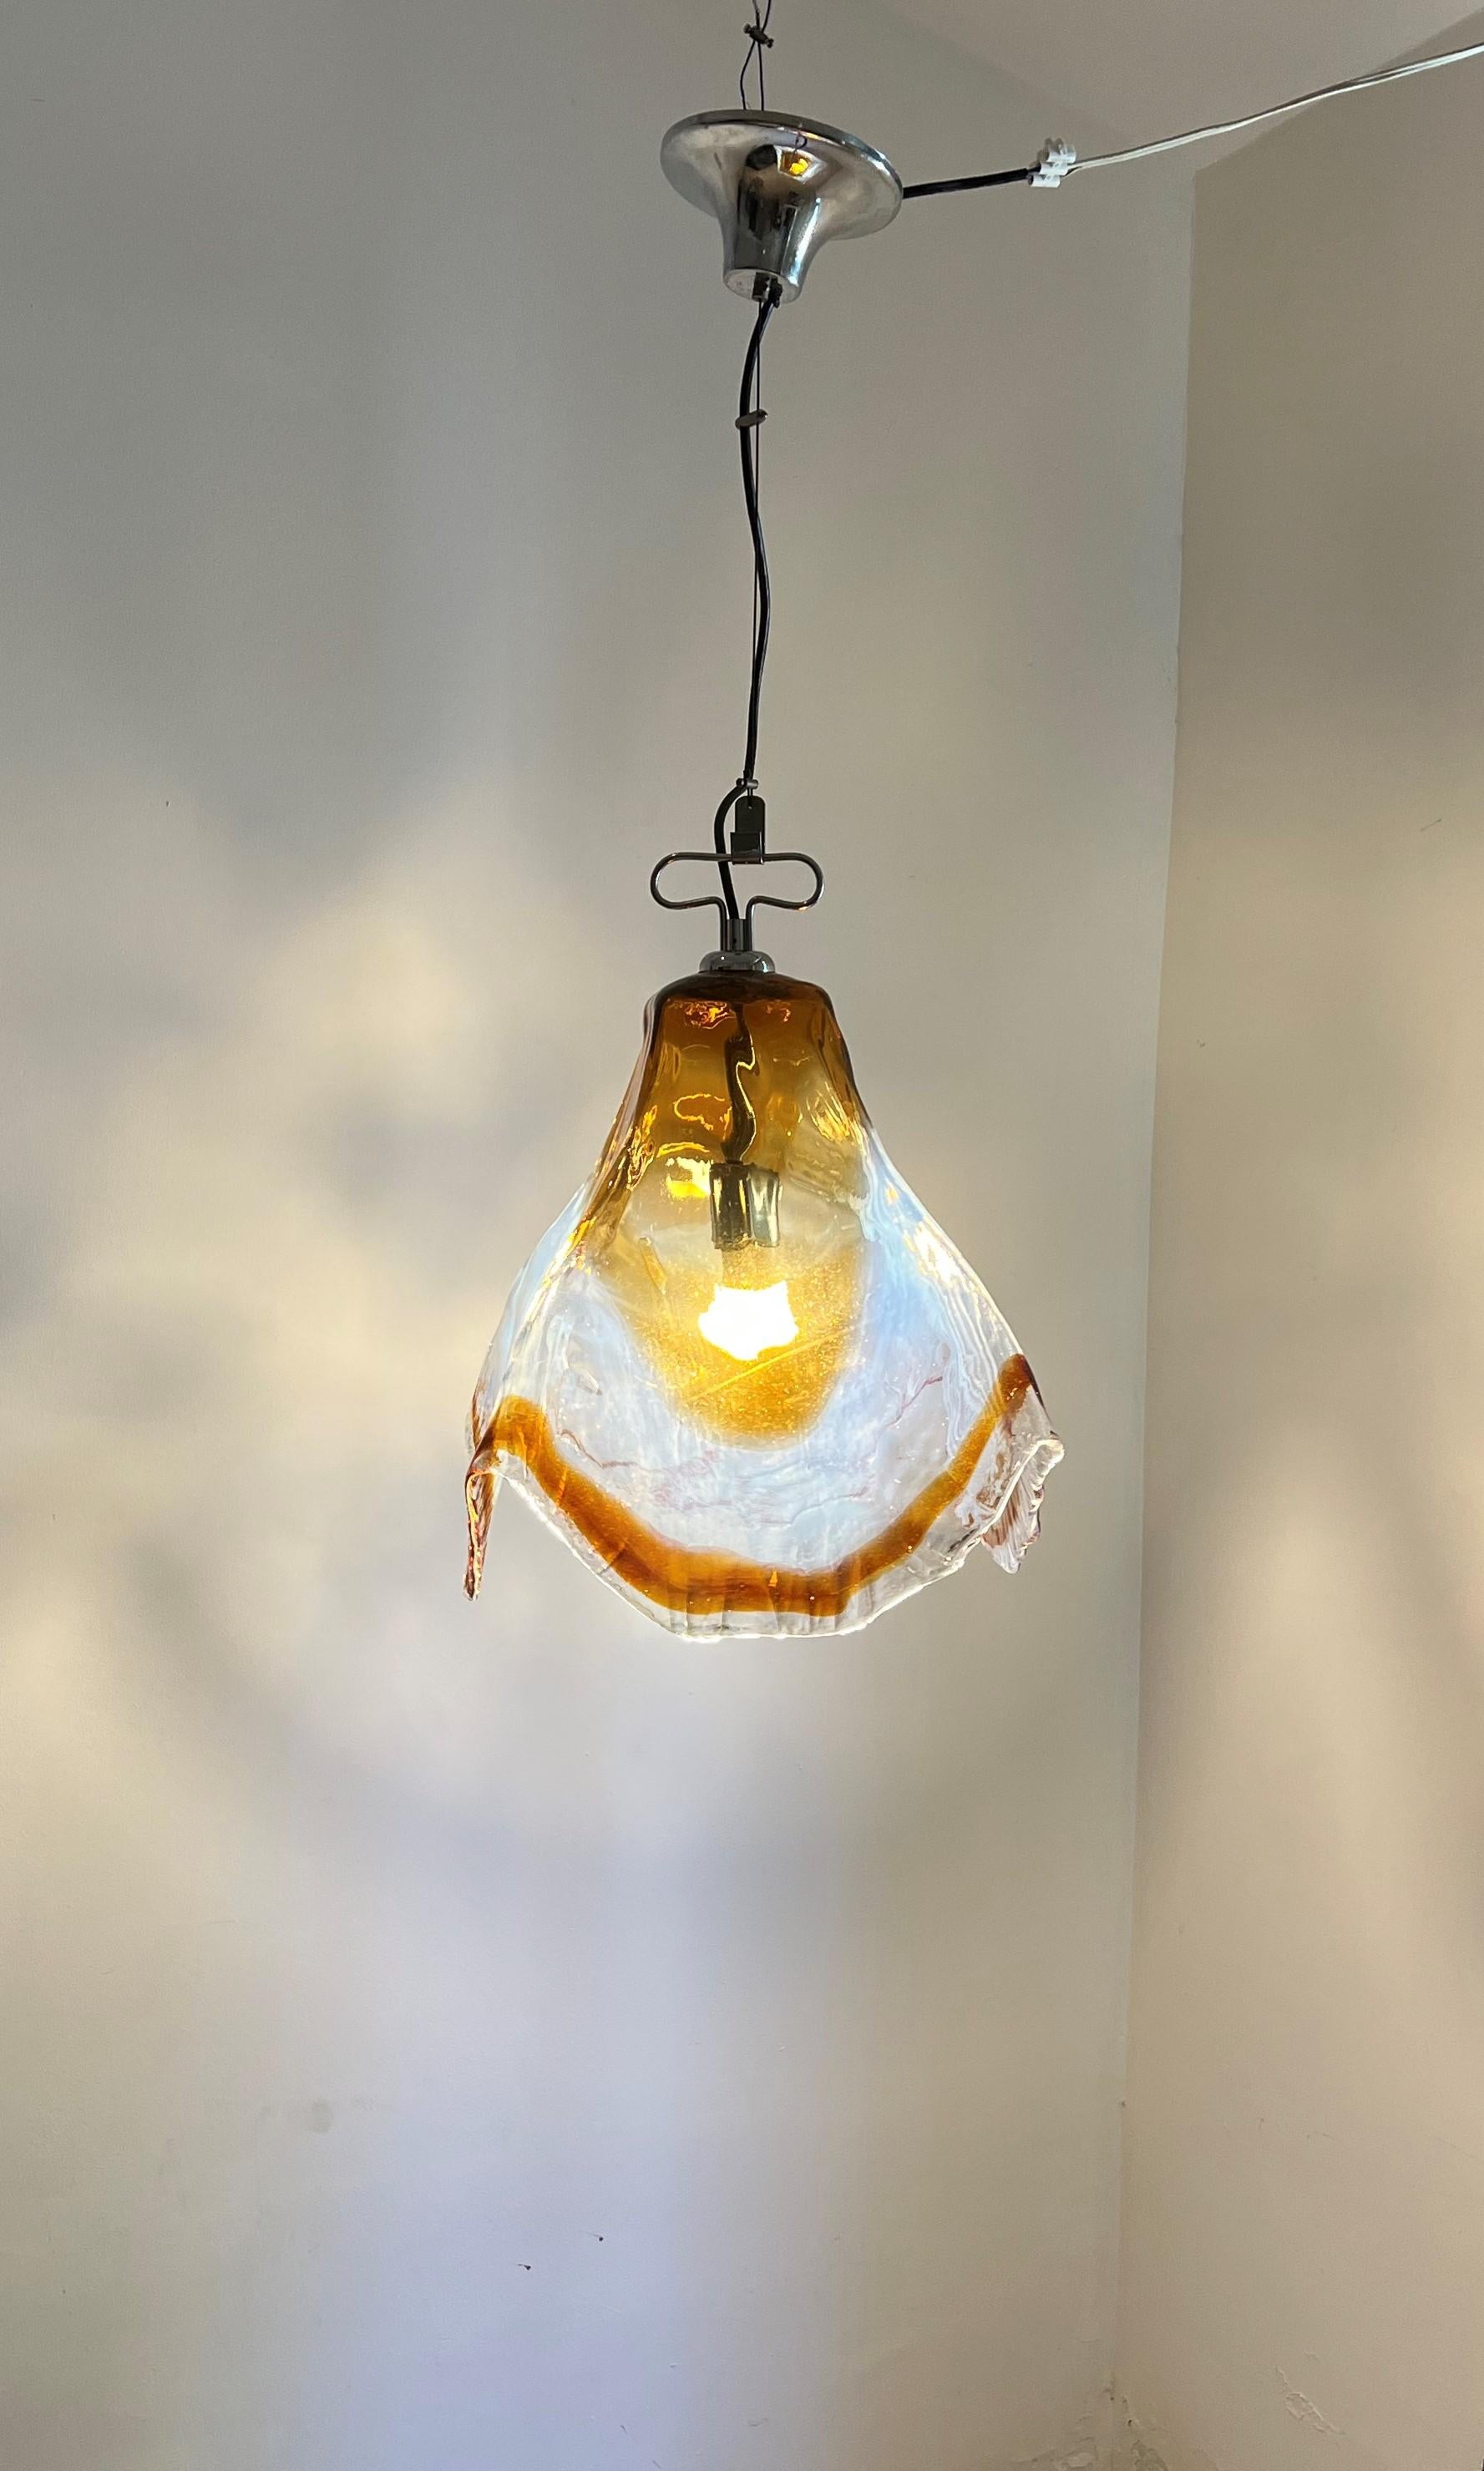 20th Century Mid-Century Modern Pendant Light by Mazzega in Murano Opalescent Glass ca 1968 For Sale